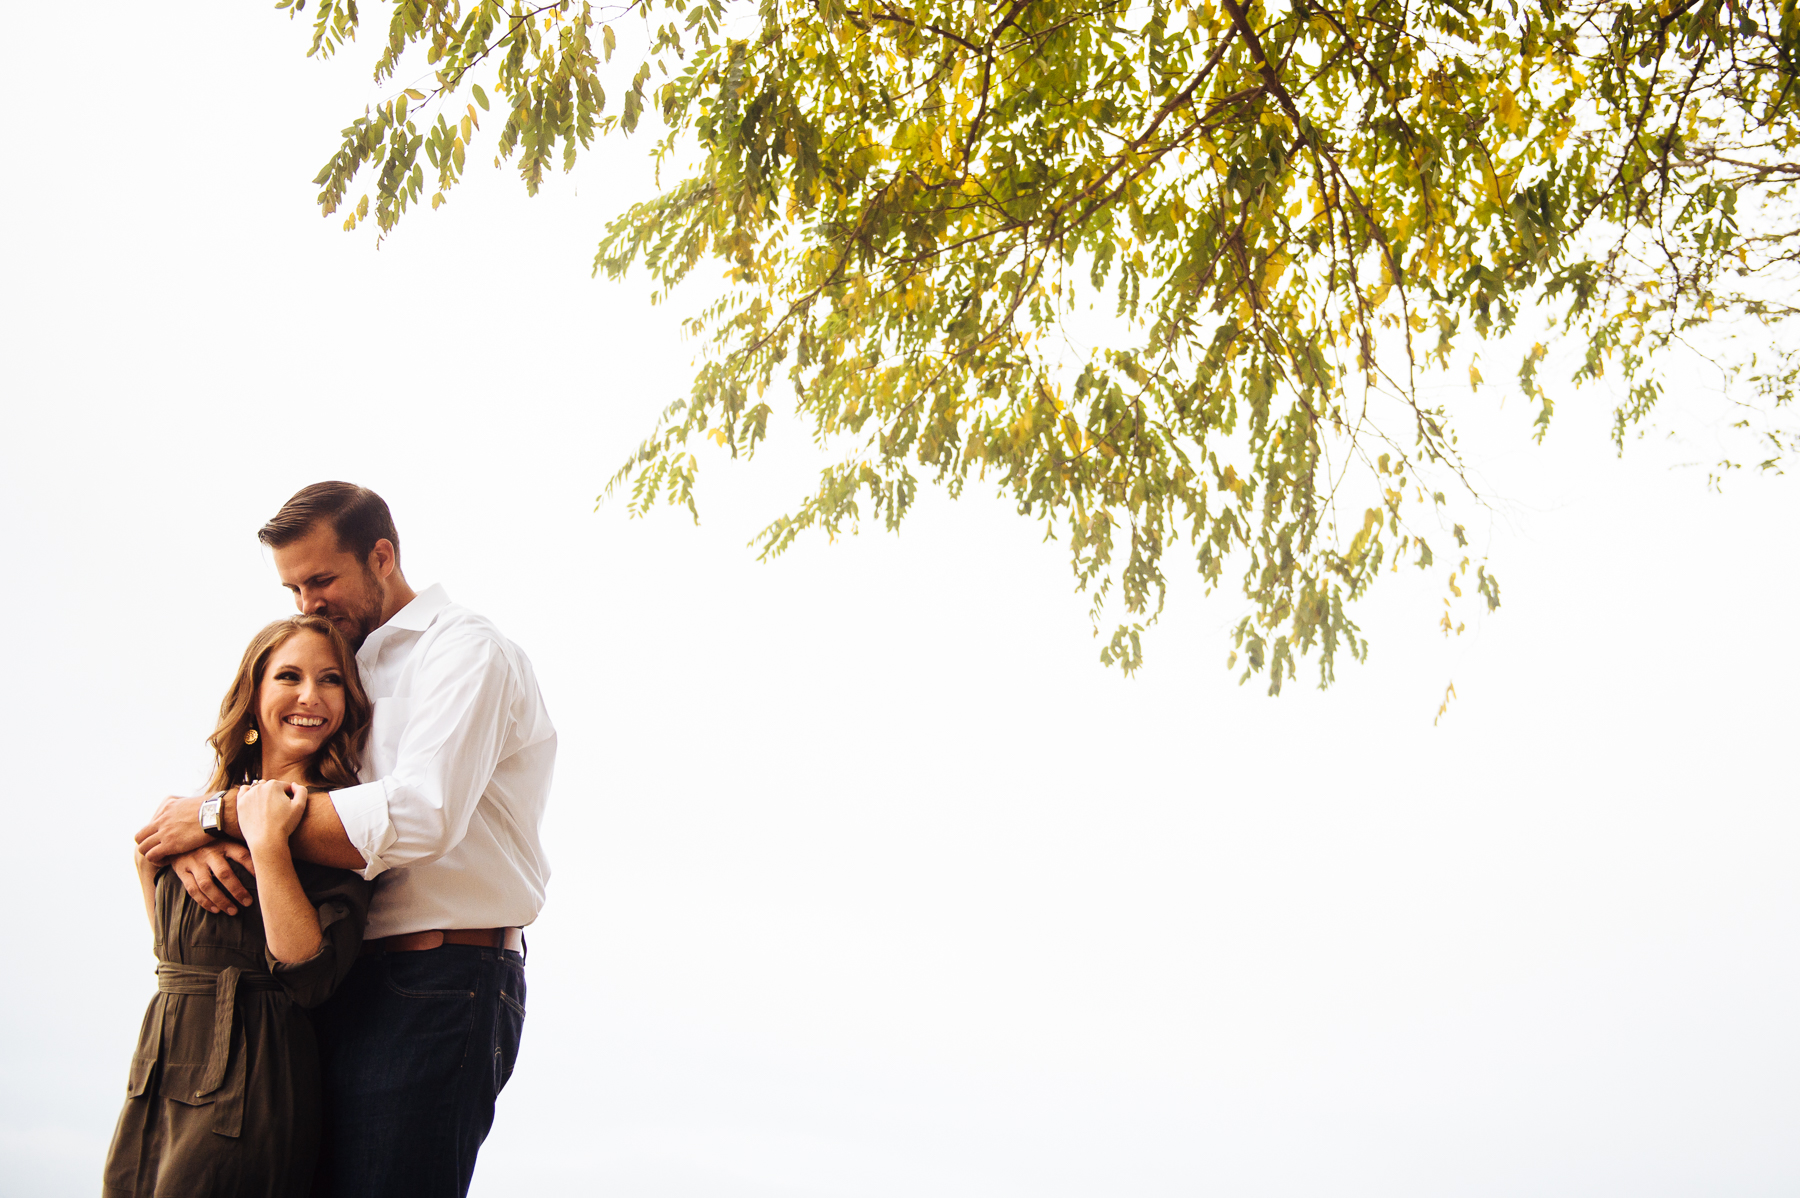 seattle-wedding-photographer-engagement-sessions-best-42